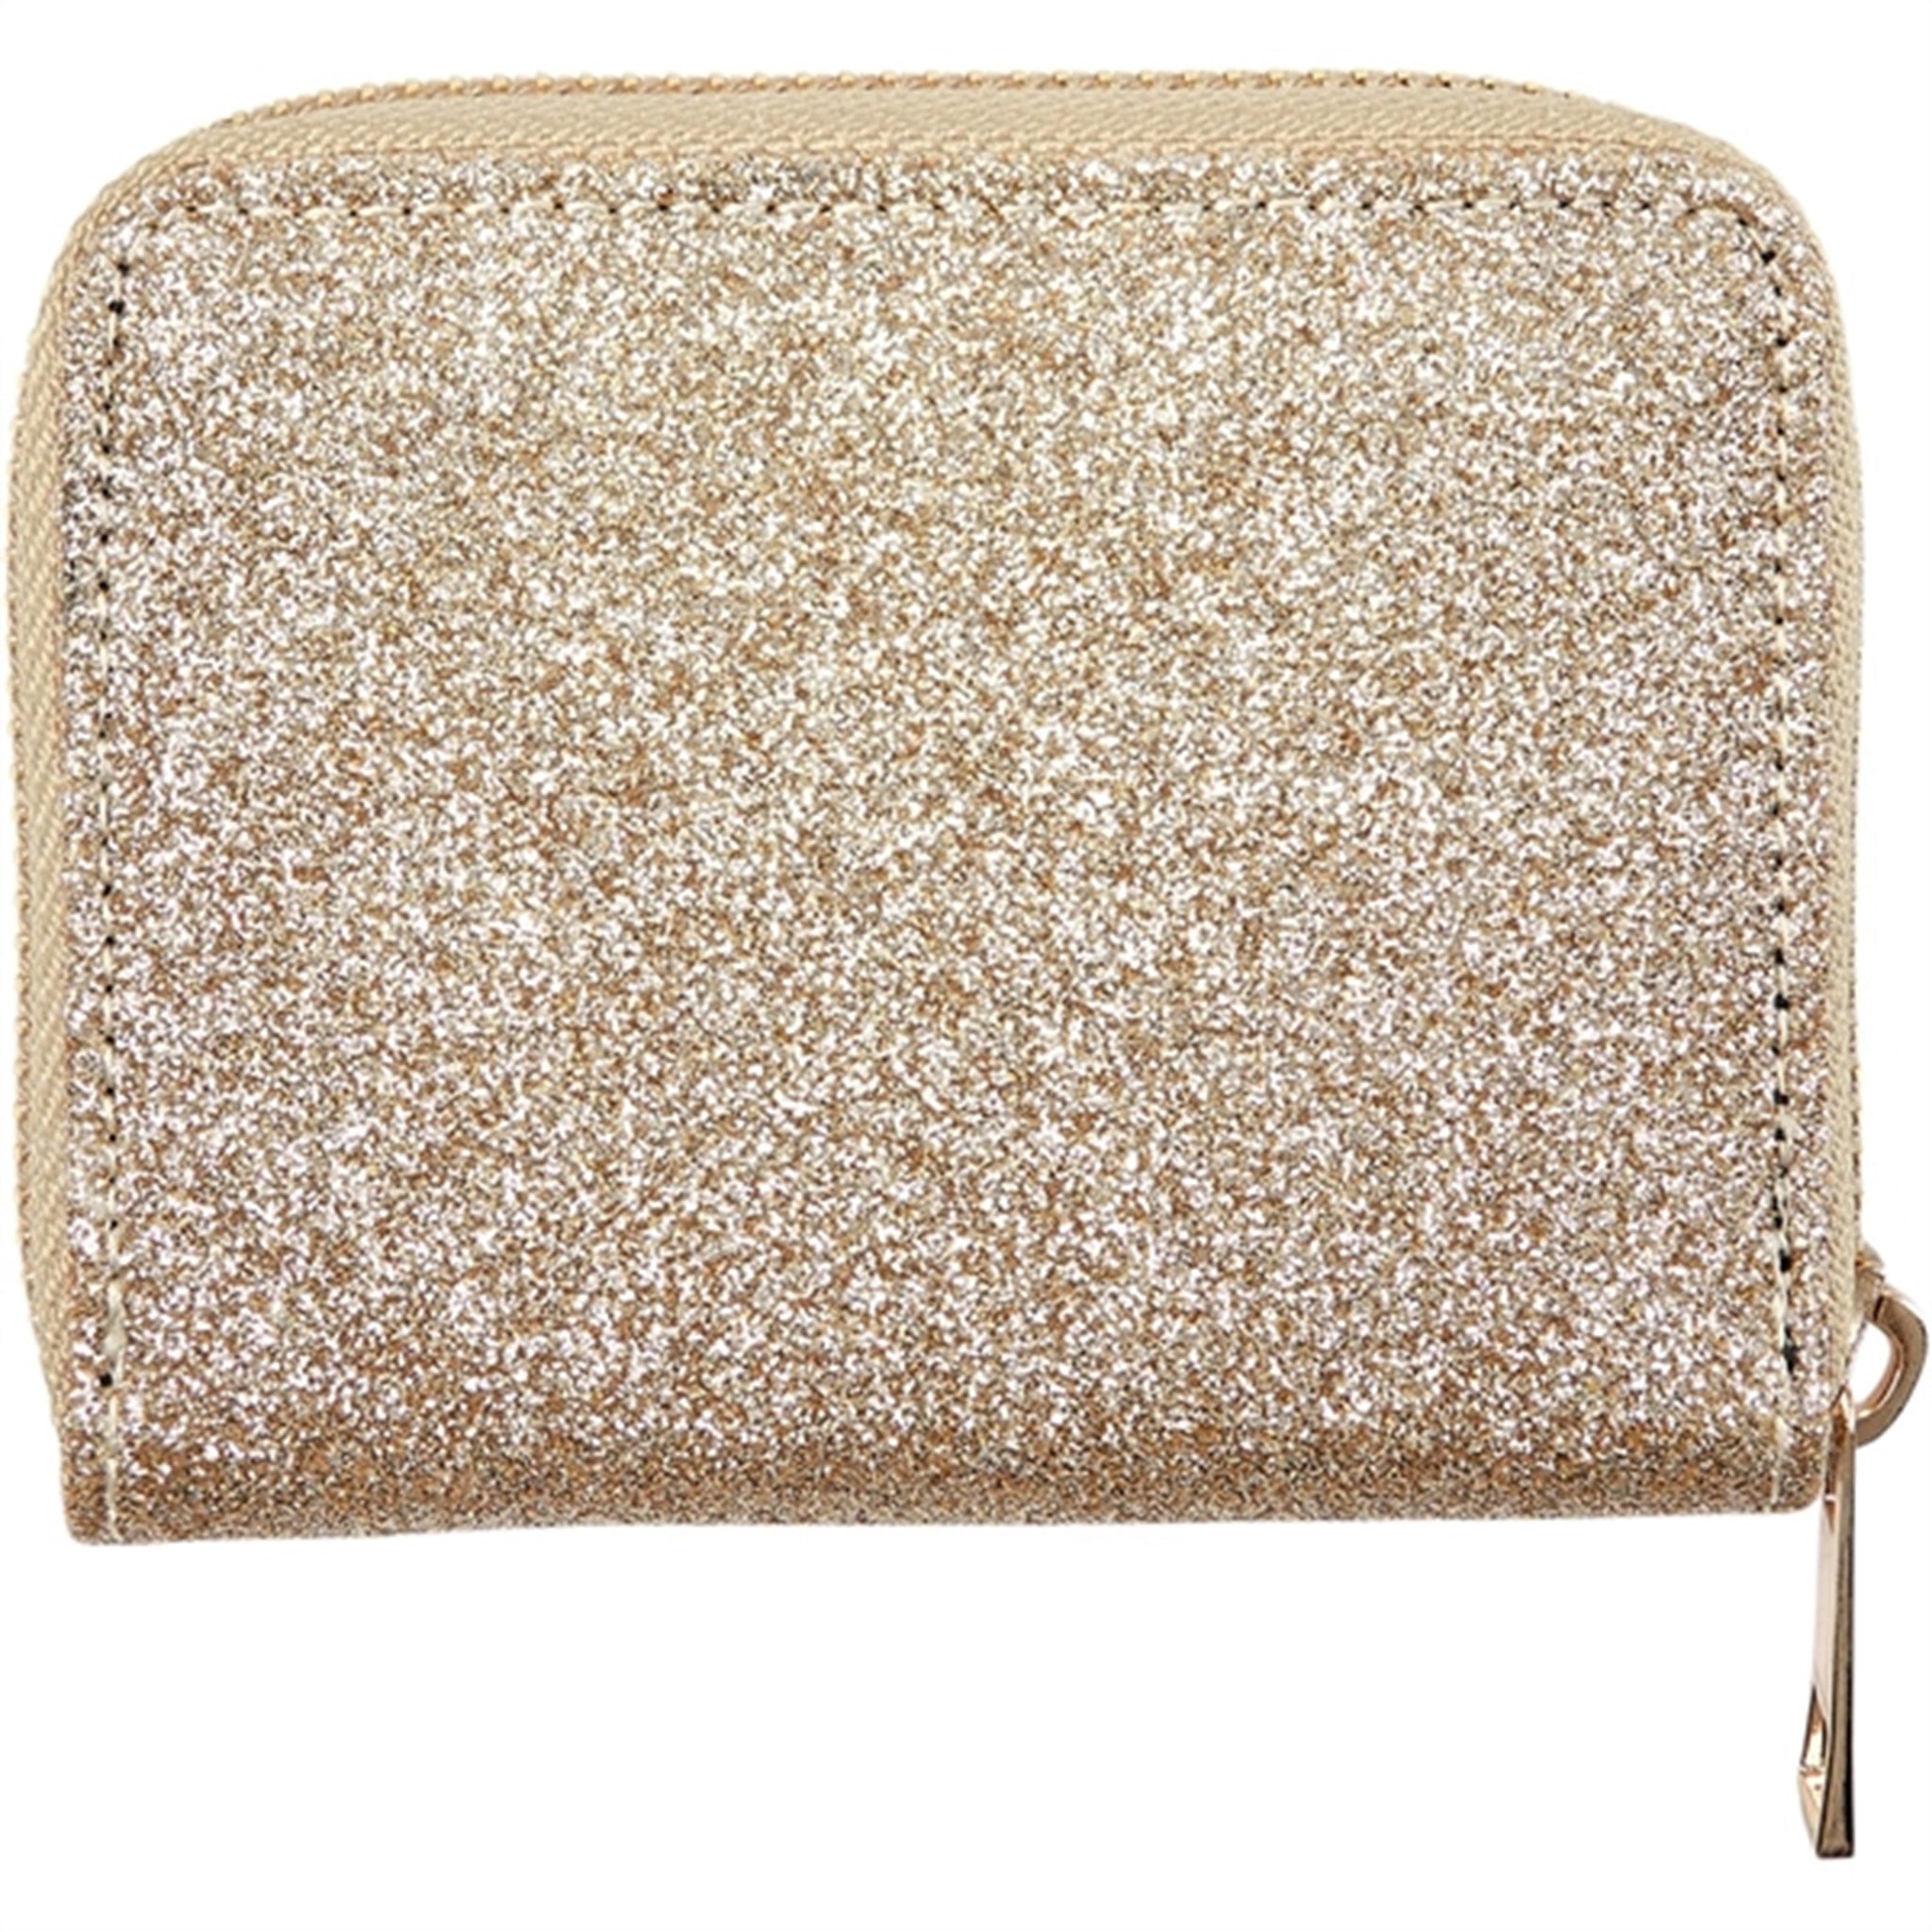 Petit By Sofie Schnoor Champagne Wallet 3